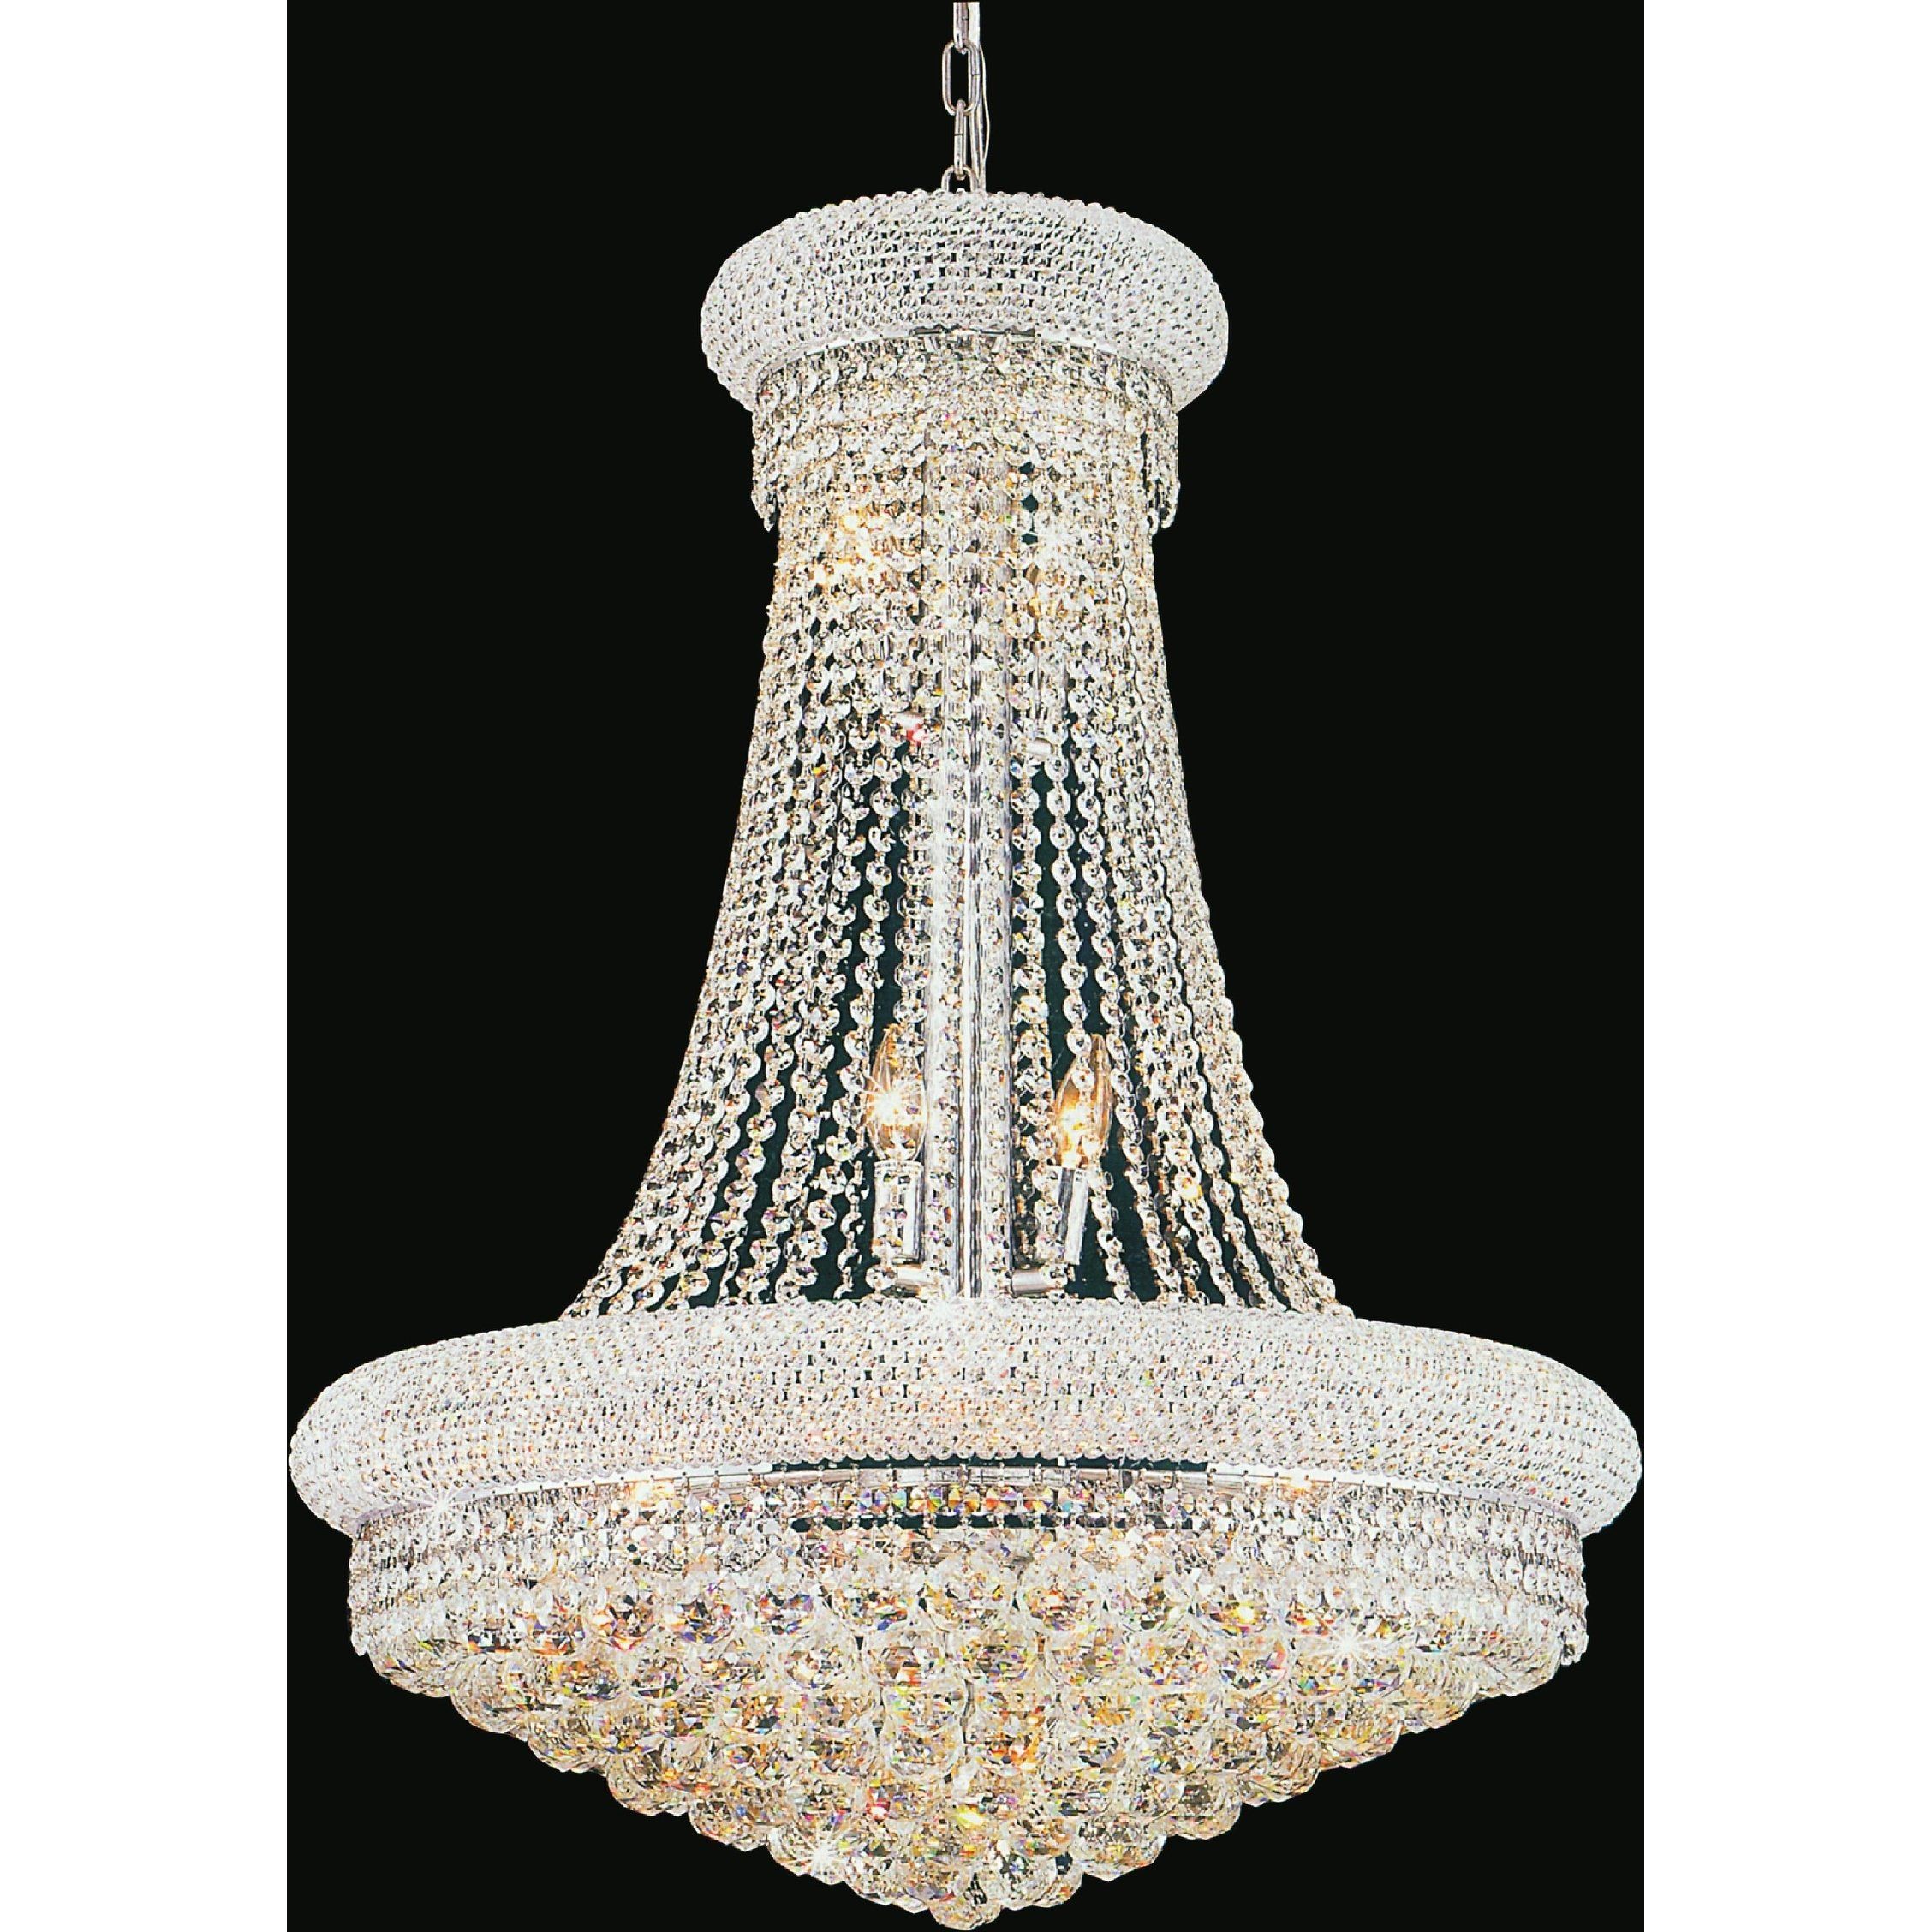 Ceiling Lights | Crystal Chandelier, Chrome Chandeliers With Regard To Weathered Oak And Bronze 38 Inch Eight Light Adjustable Chandeliers (View 8 of 15)